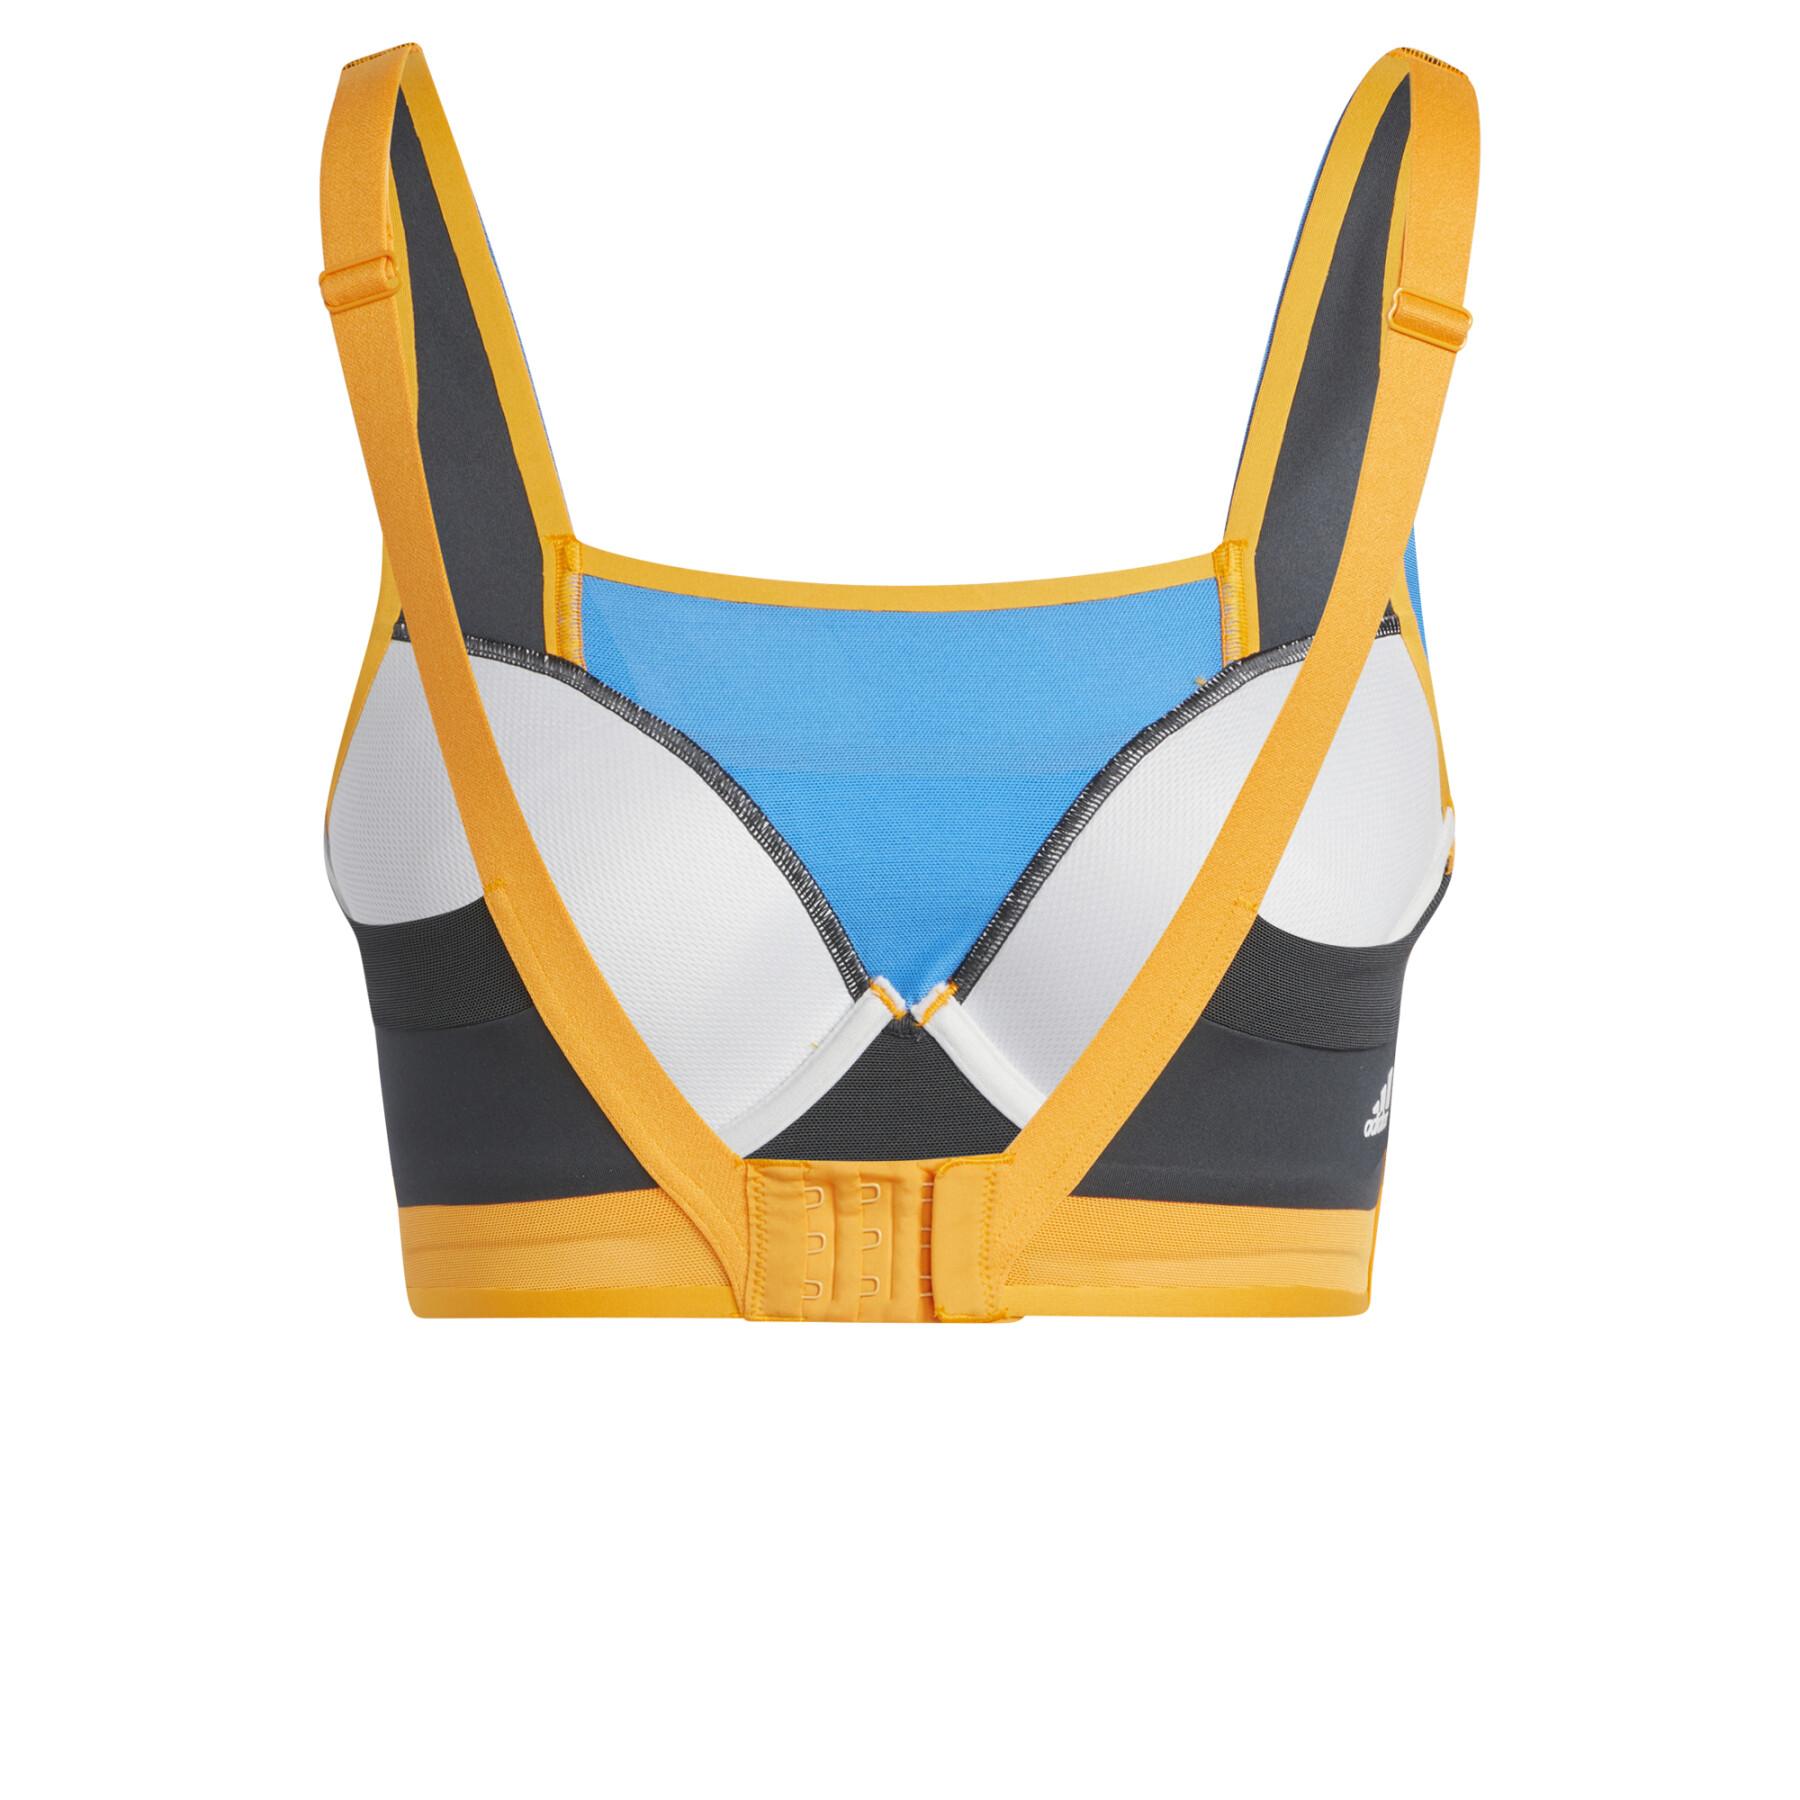 Brassière femme adidas Tlrd Impact Luxe Training High-Support